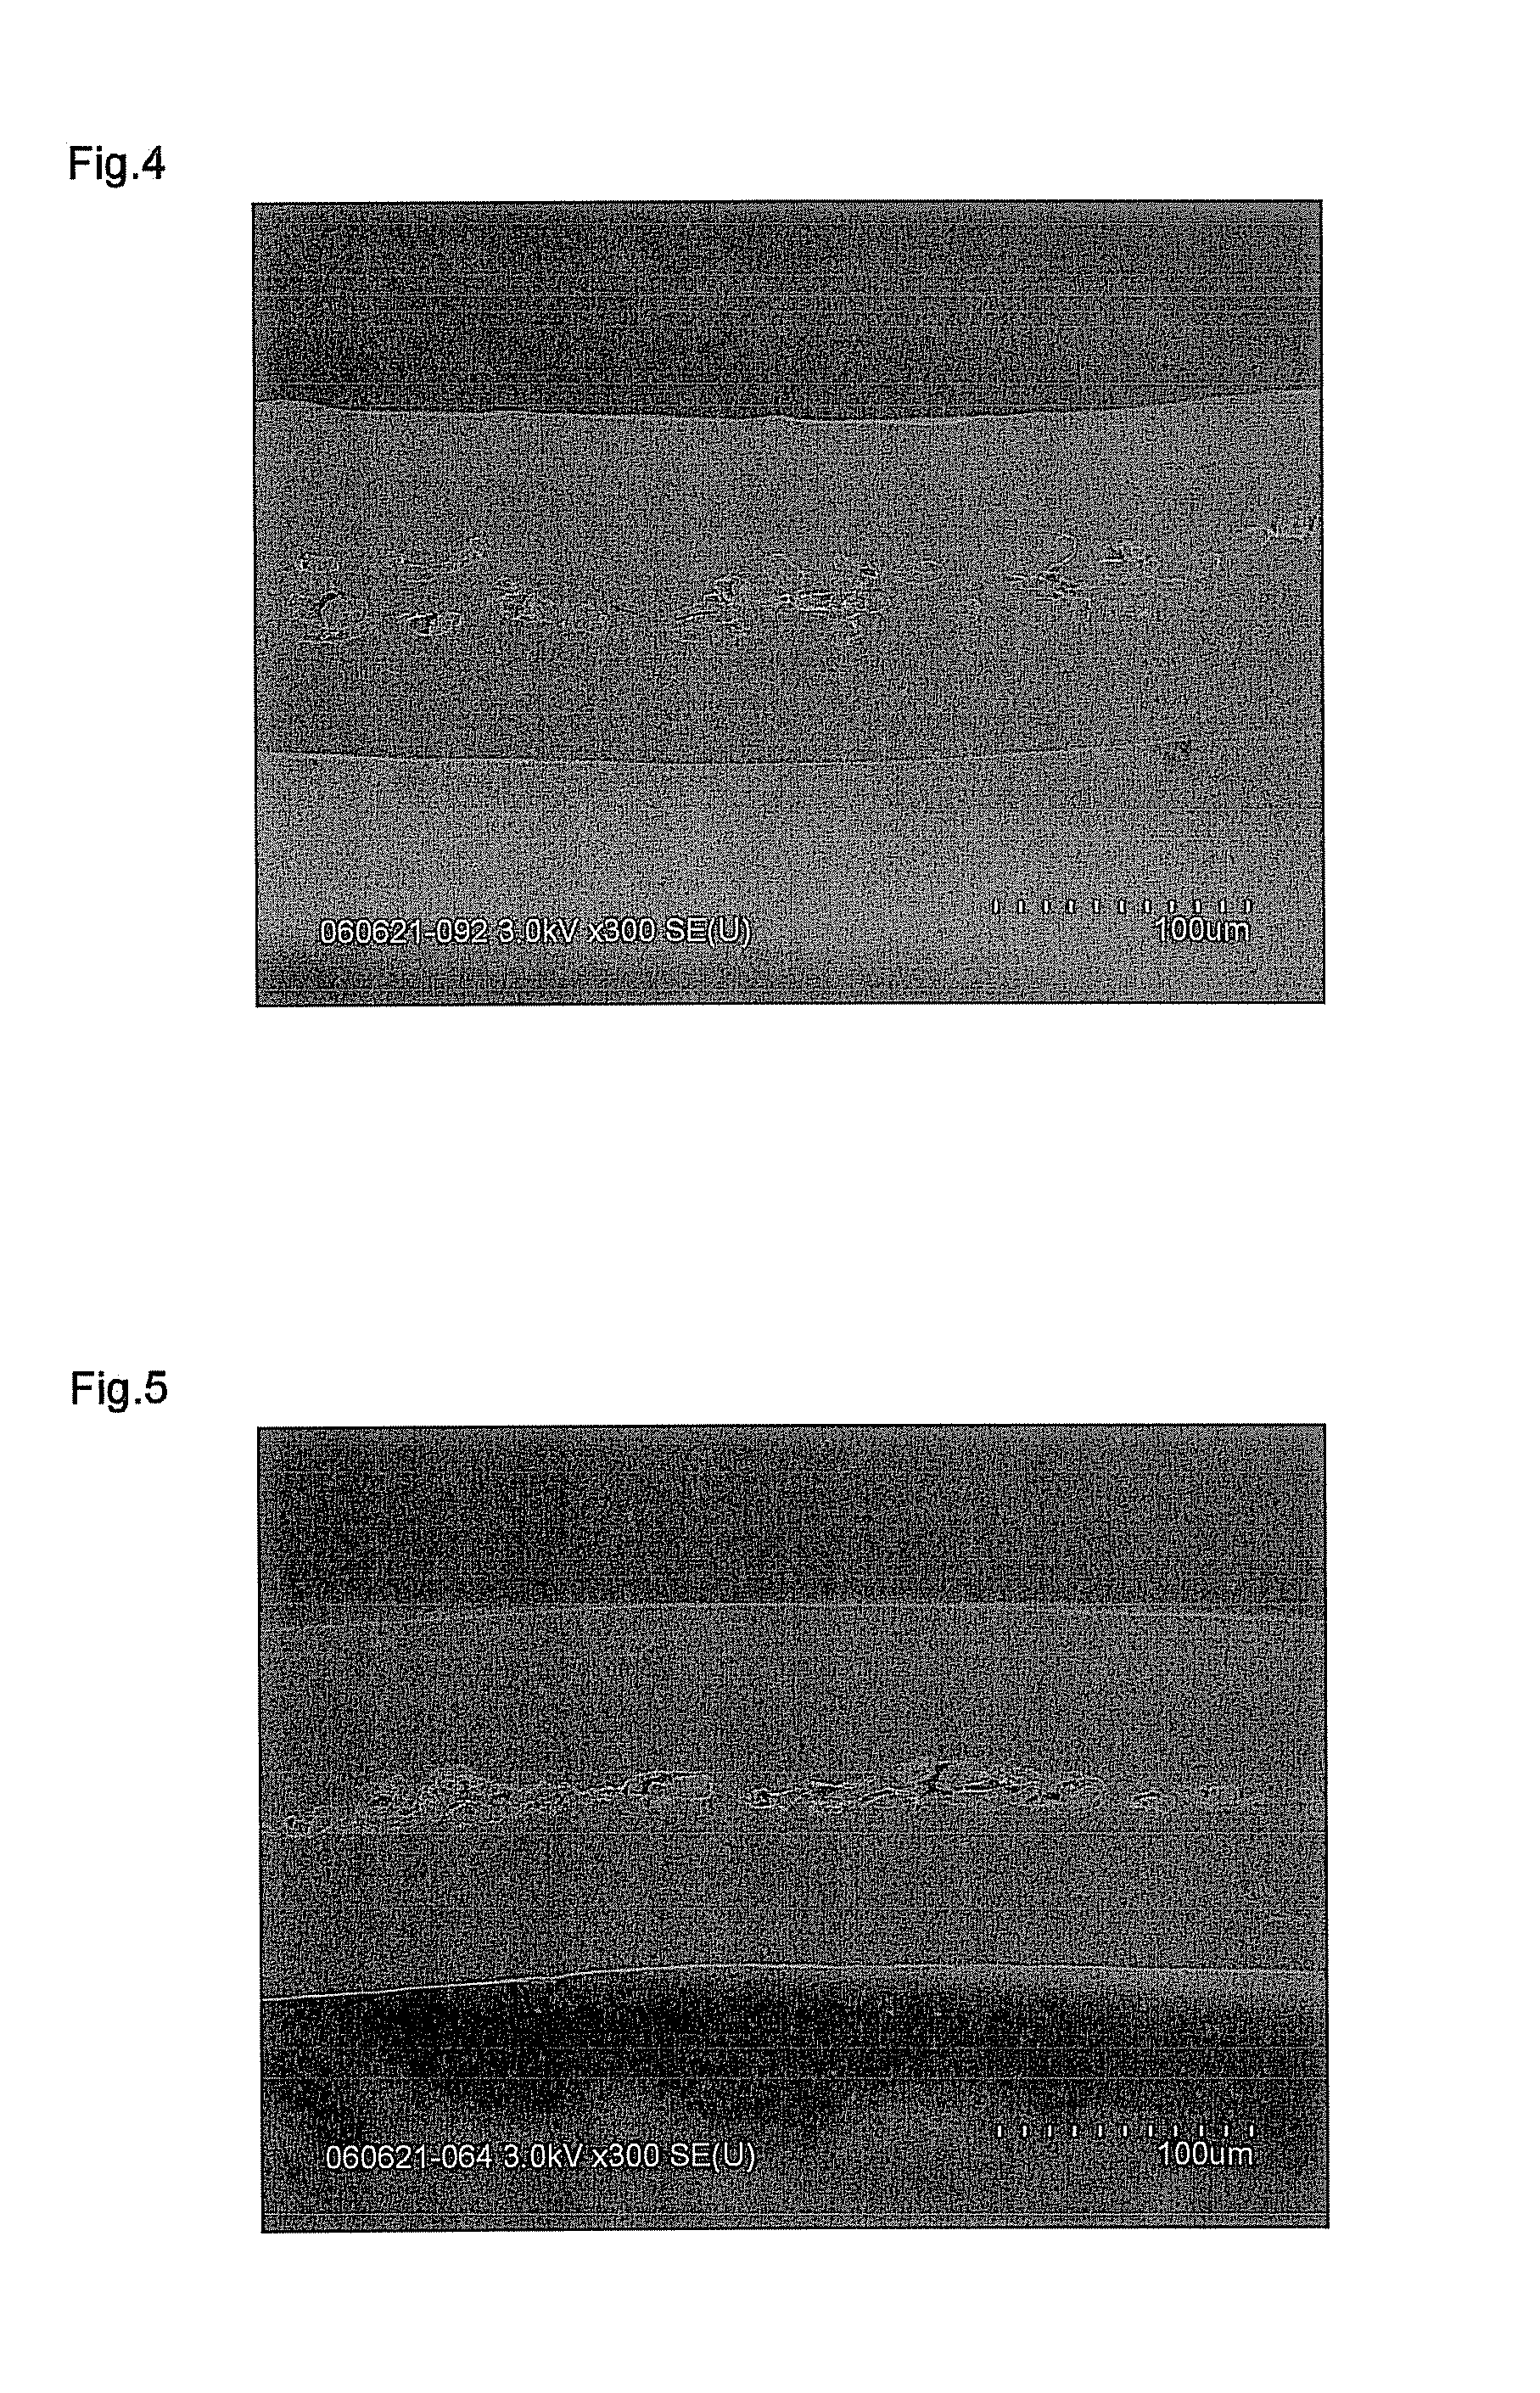 Method for producing double-sided pressure-sensitive adhesive sheet